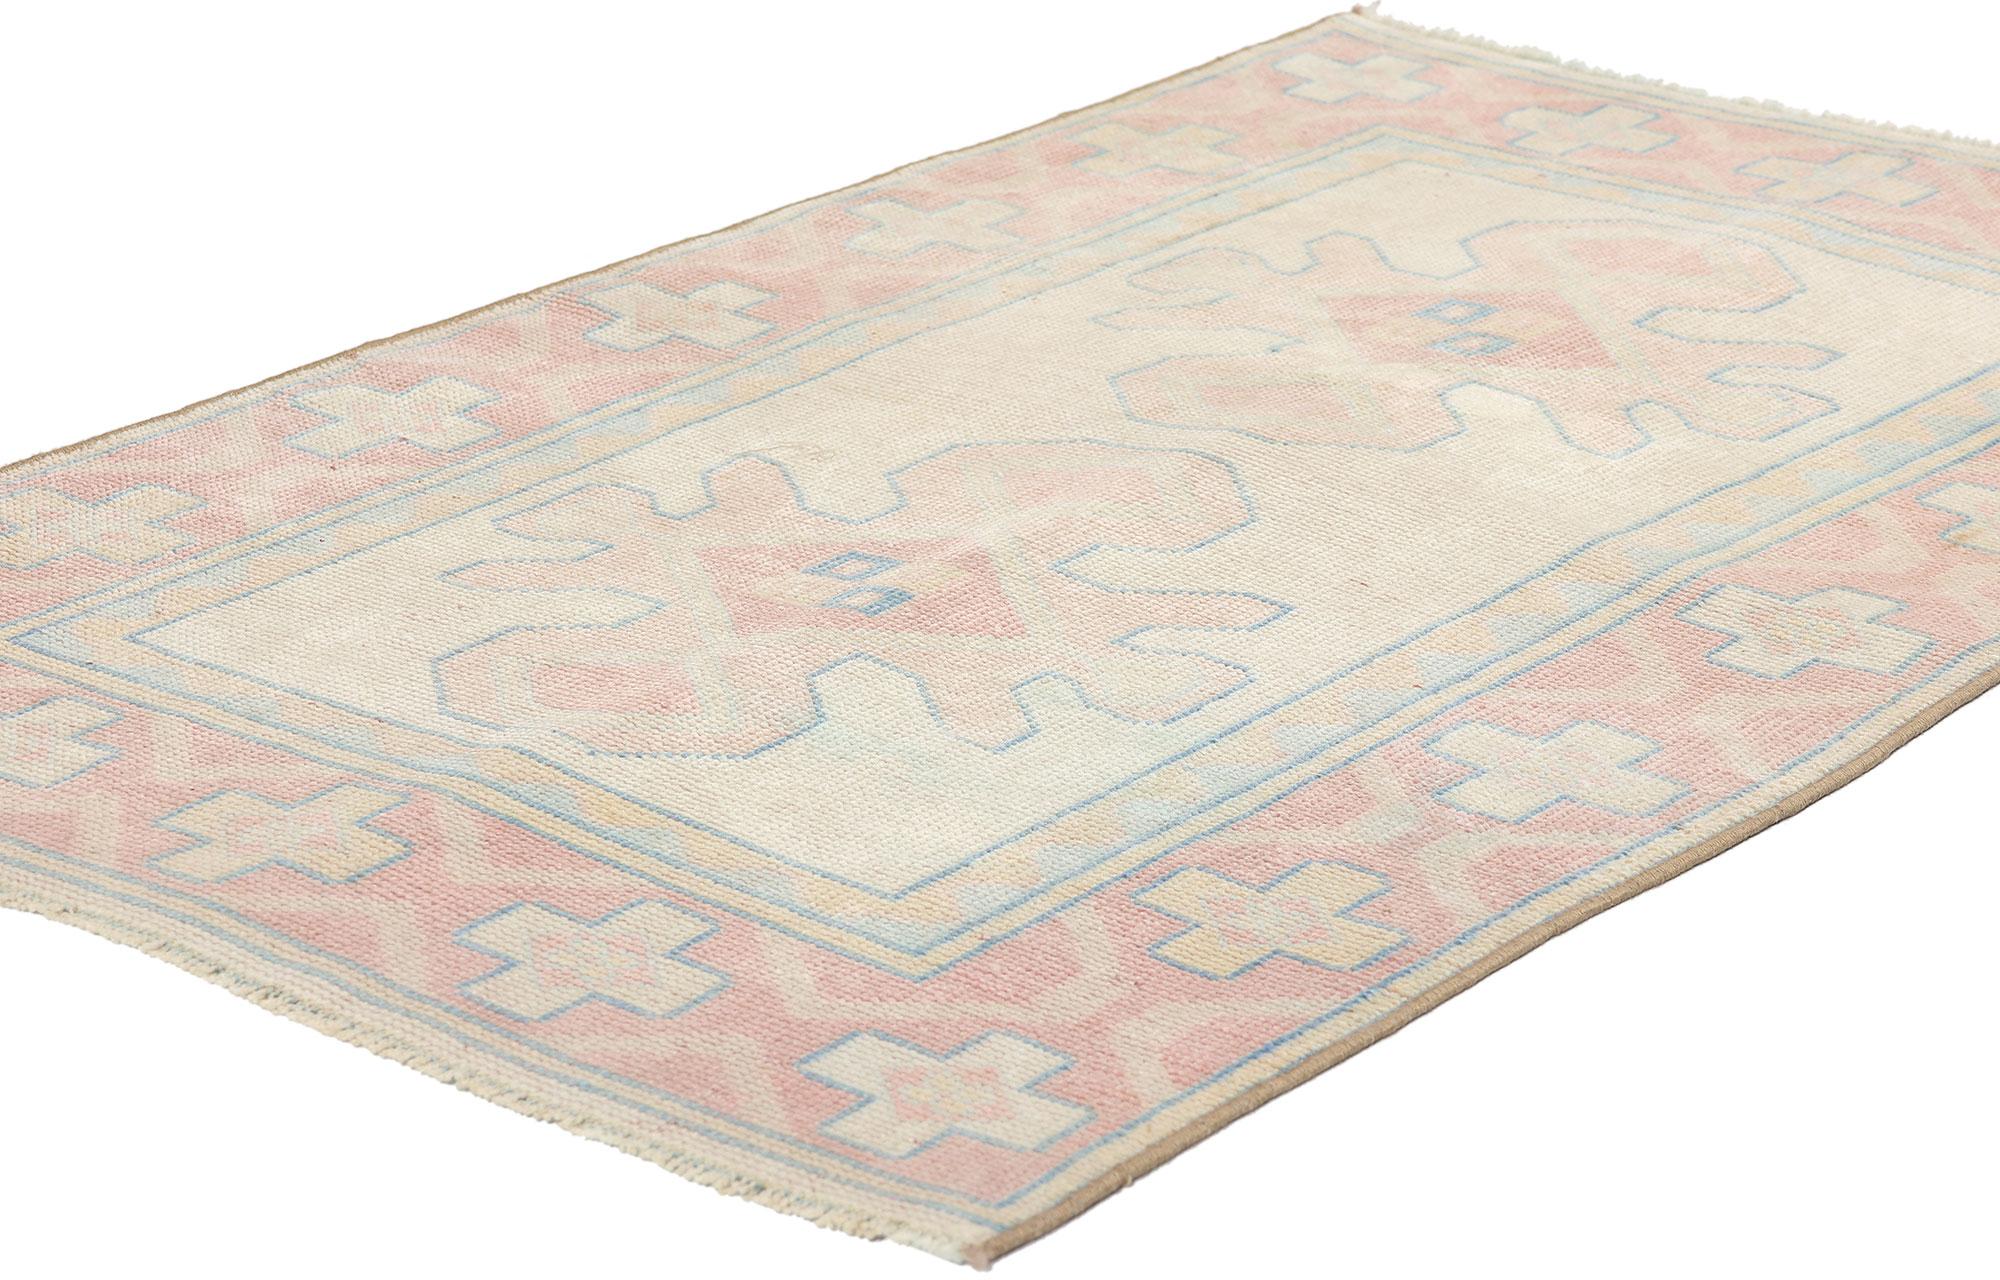 53930 Vintage Turkish Pink Oushak Rug, 02'08 x 04'04. Turkish Oushak rugs, hailing from the Western region of Oushak in Turkey, have earned acclaim for their intricate patterns, gentle color schemes, and premium wool materials. Noted for their